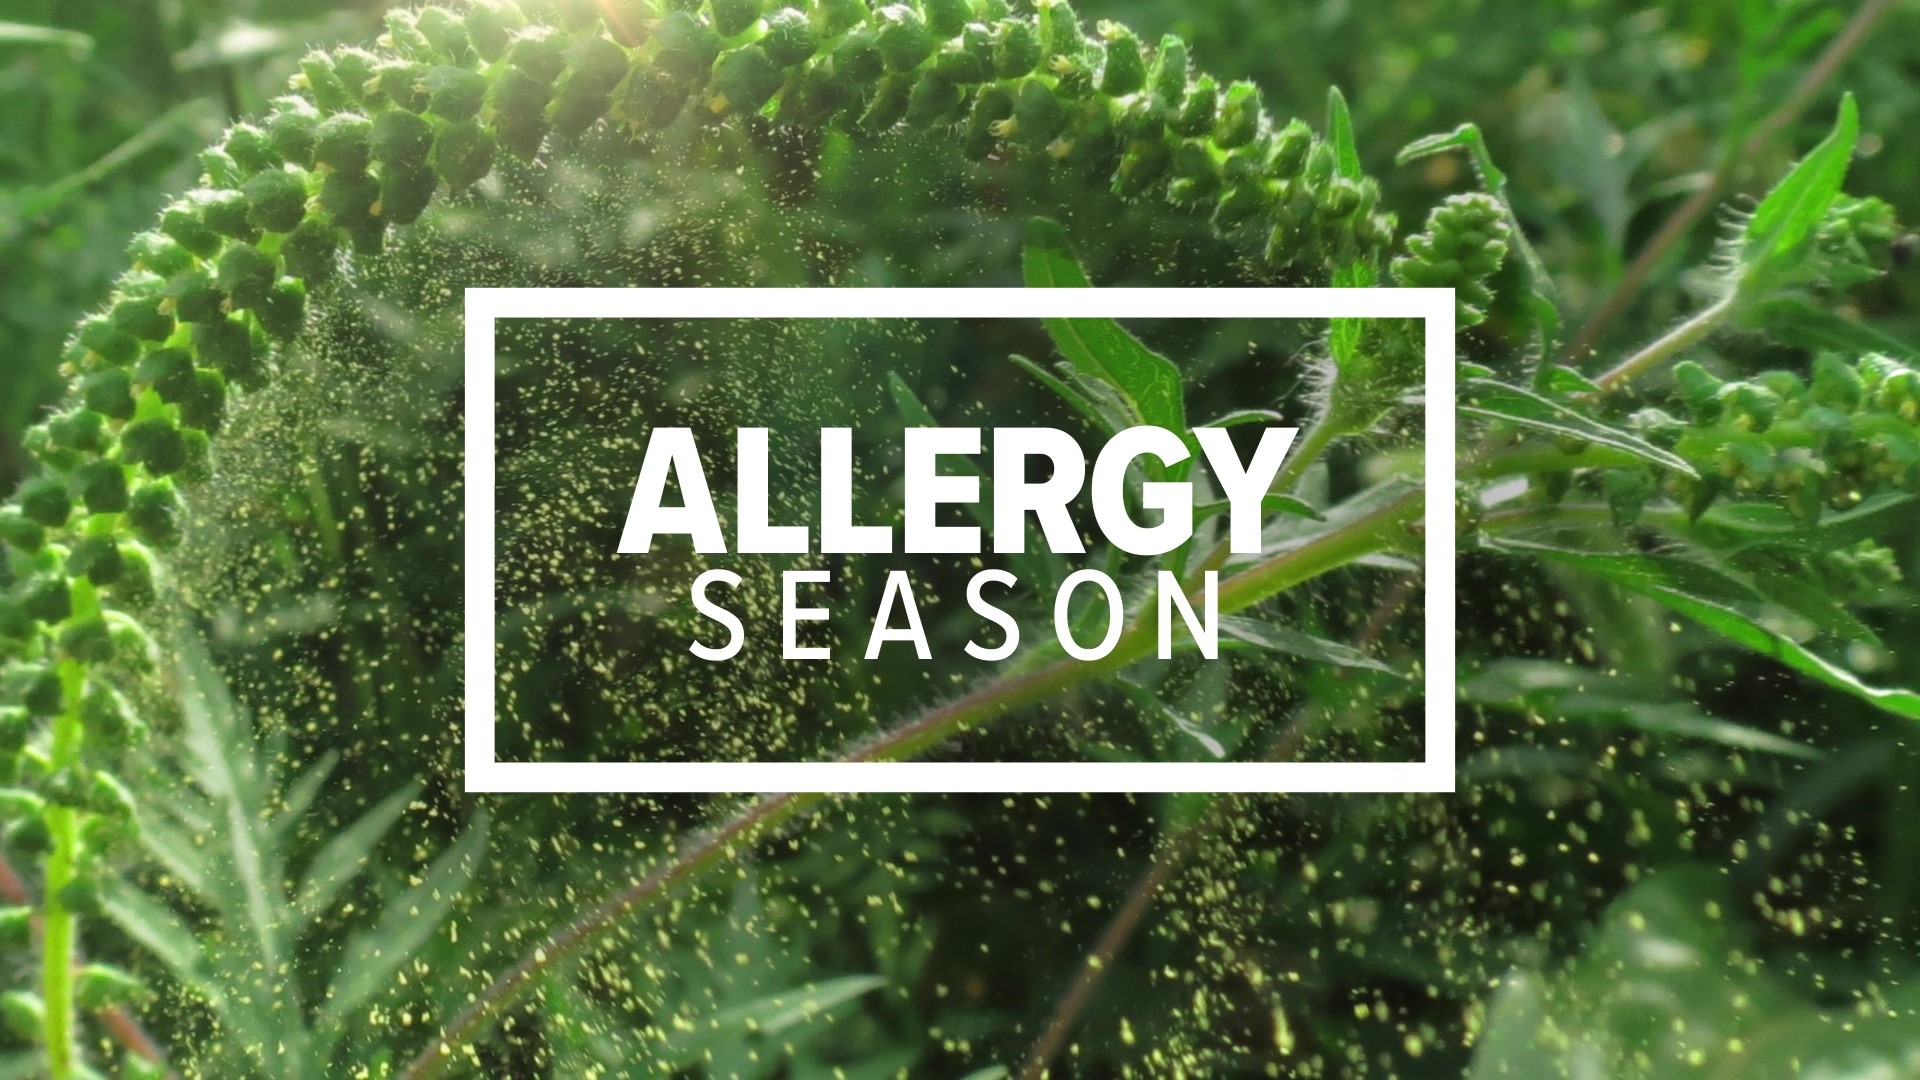 Newswatch 16's Amanda Eustice spoke with an allergist and has more on what you can expect this season.